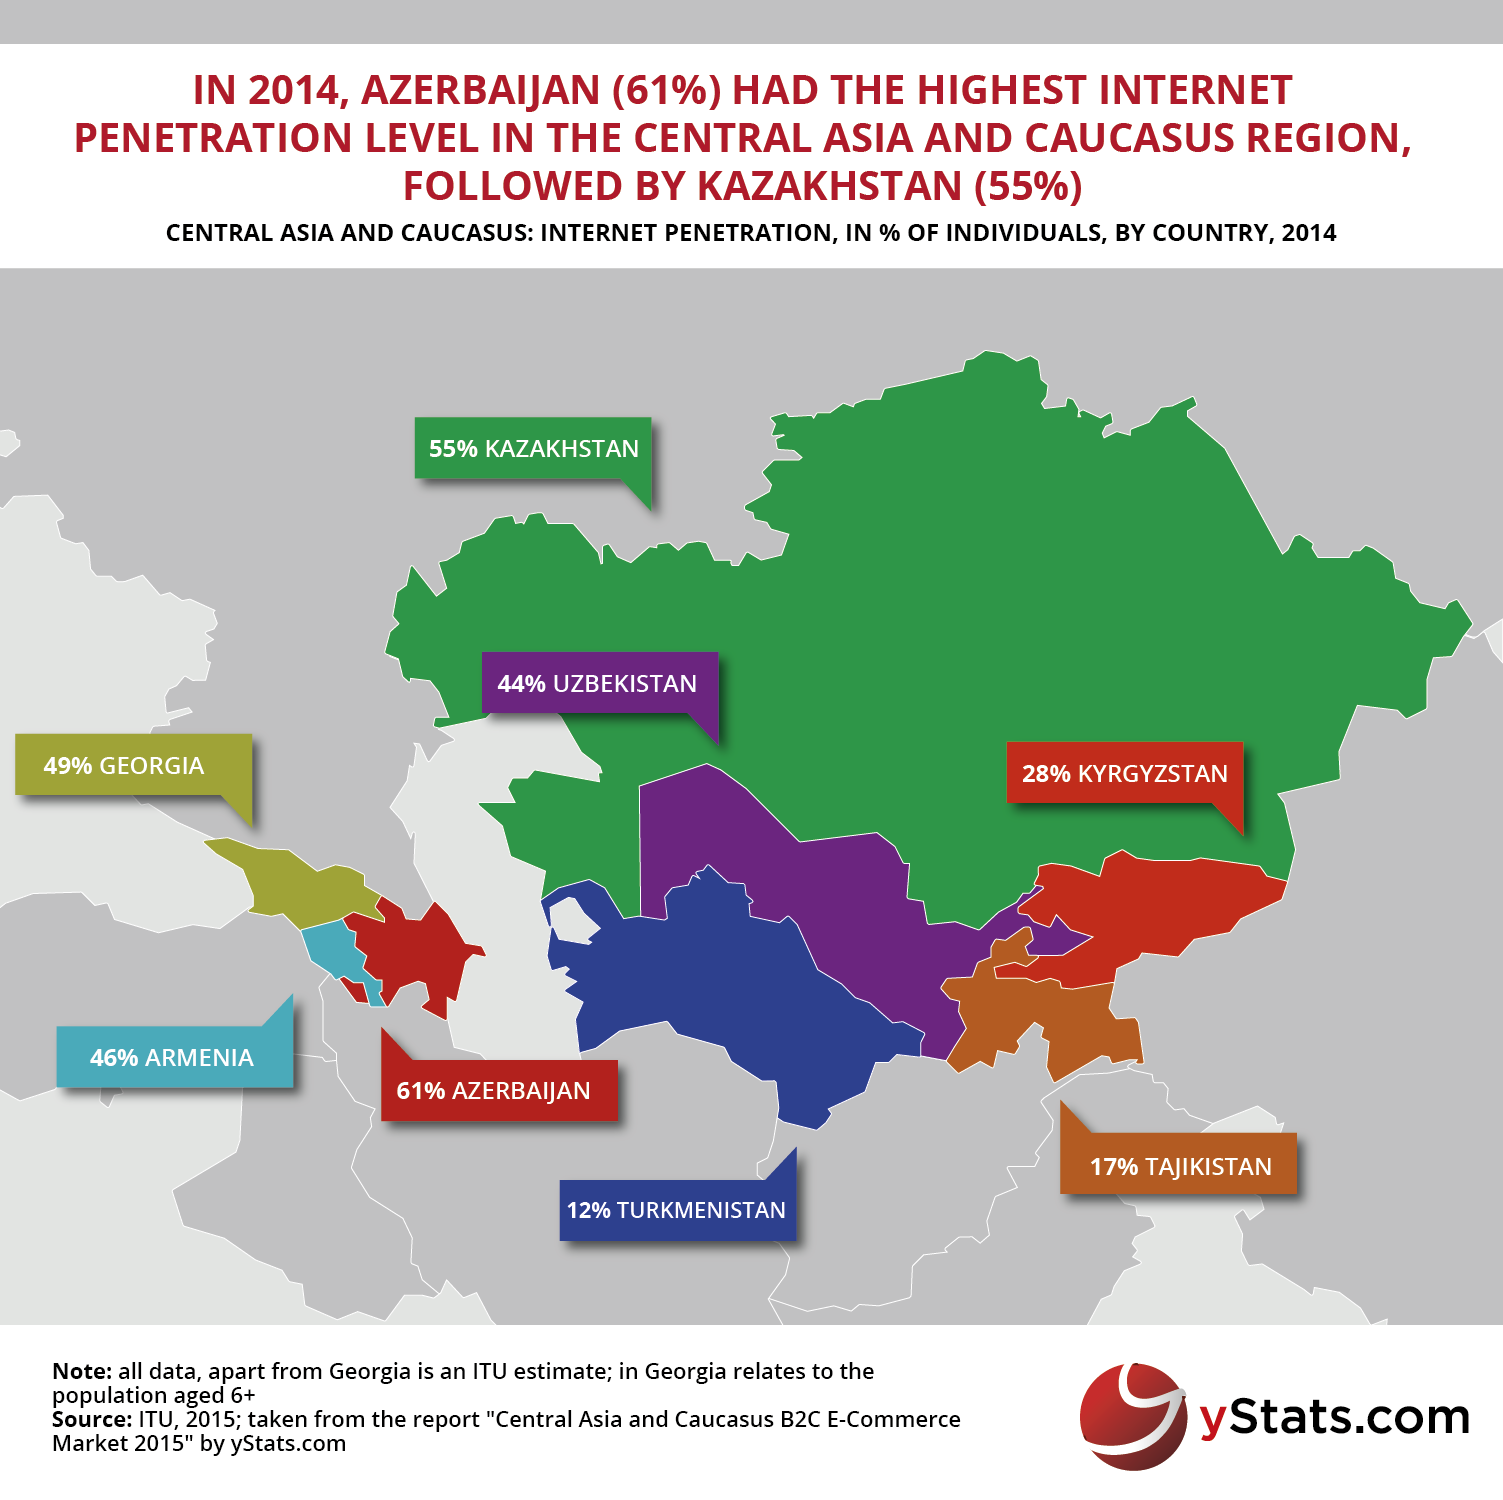 Infographic_Central Asia and Caucasus B2C E-Commerce Markrt 2015 by yStats.com